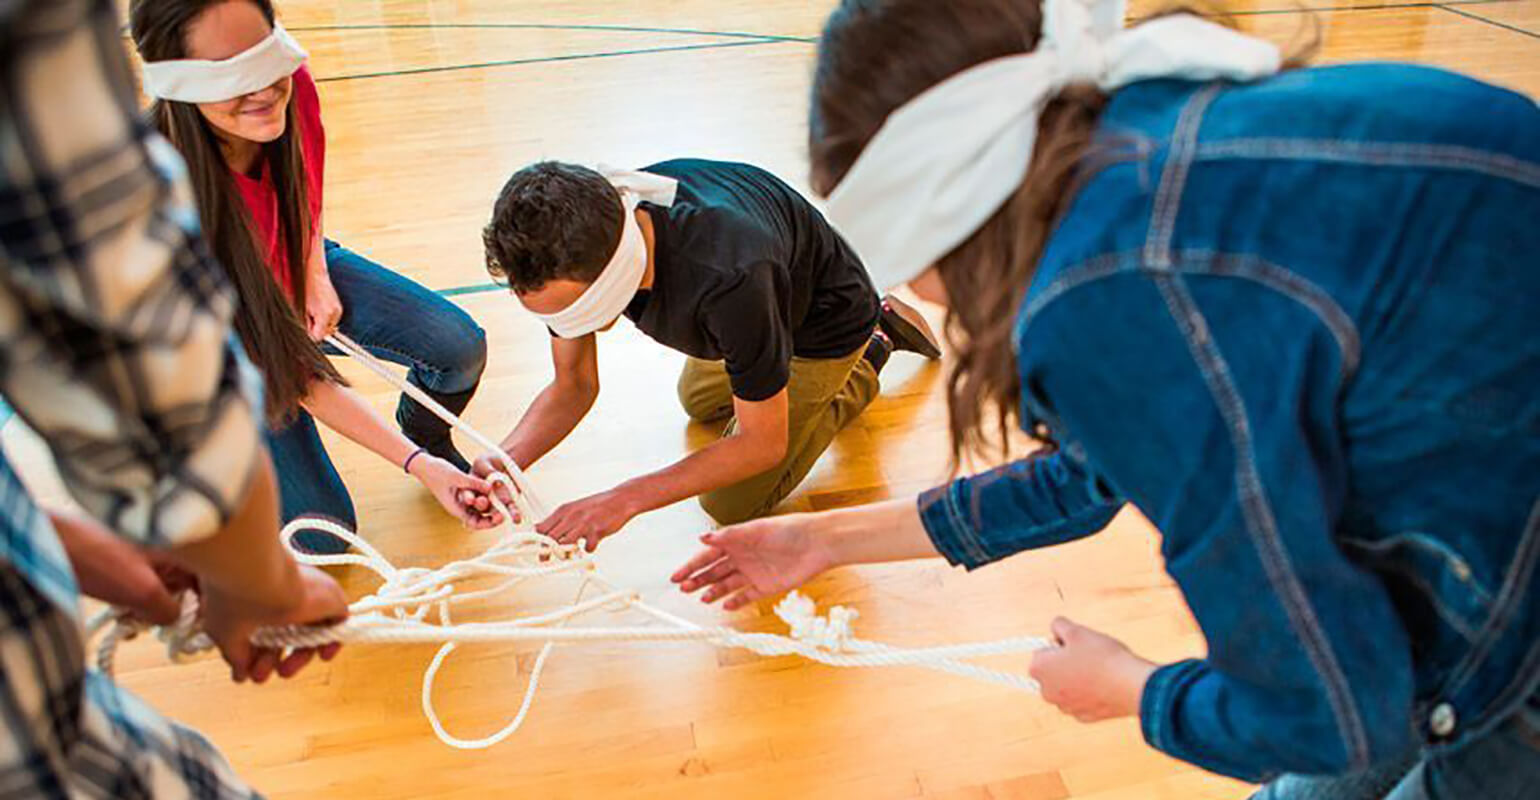 A group of young adults working together to untie the knot in a rope while blindfolded.